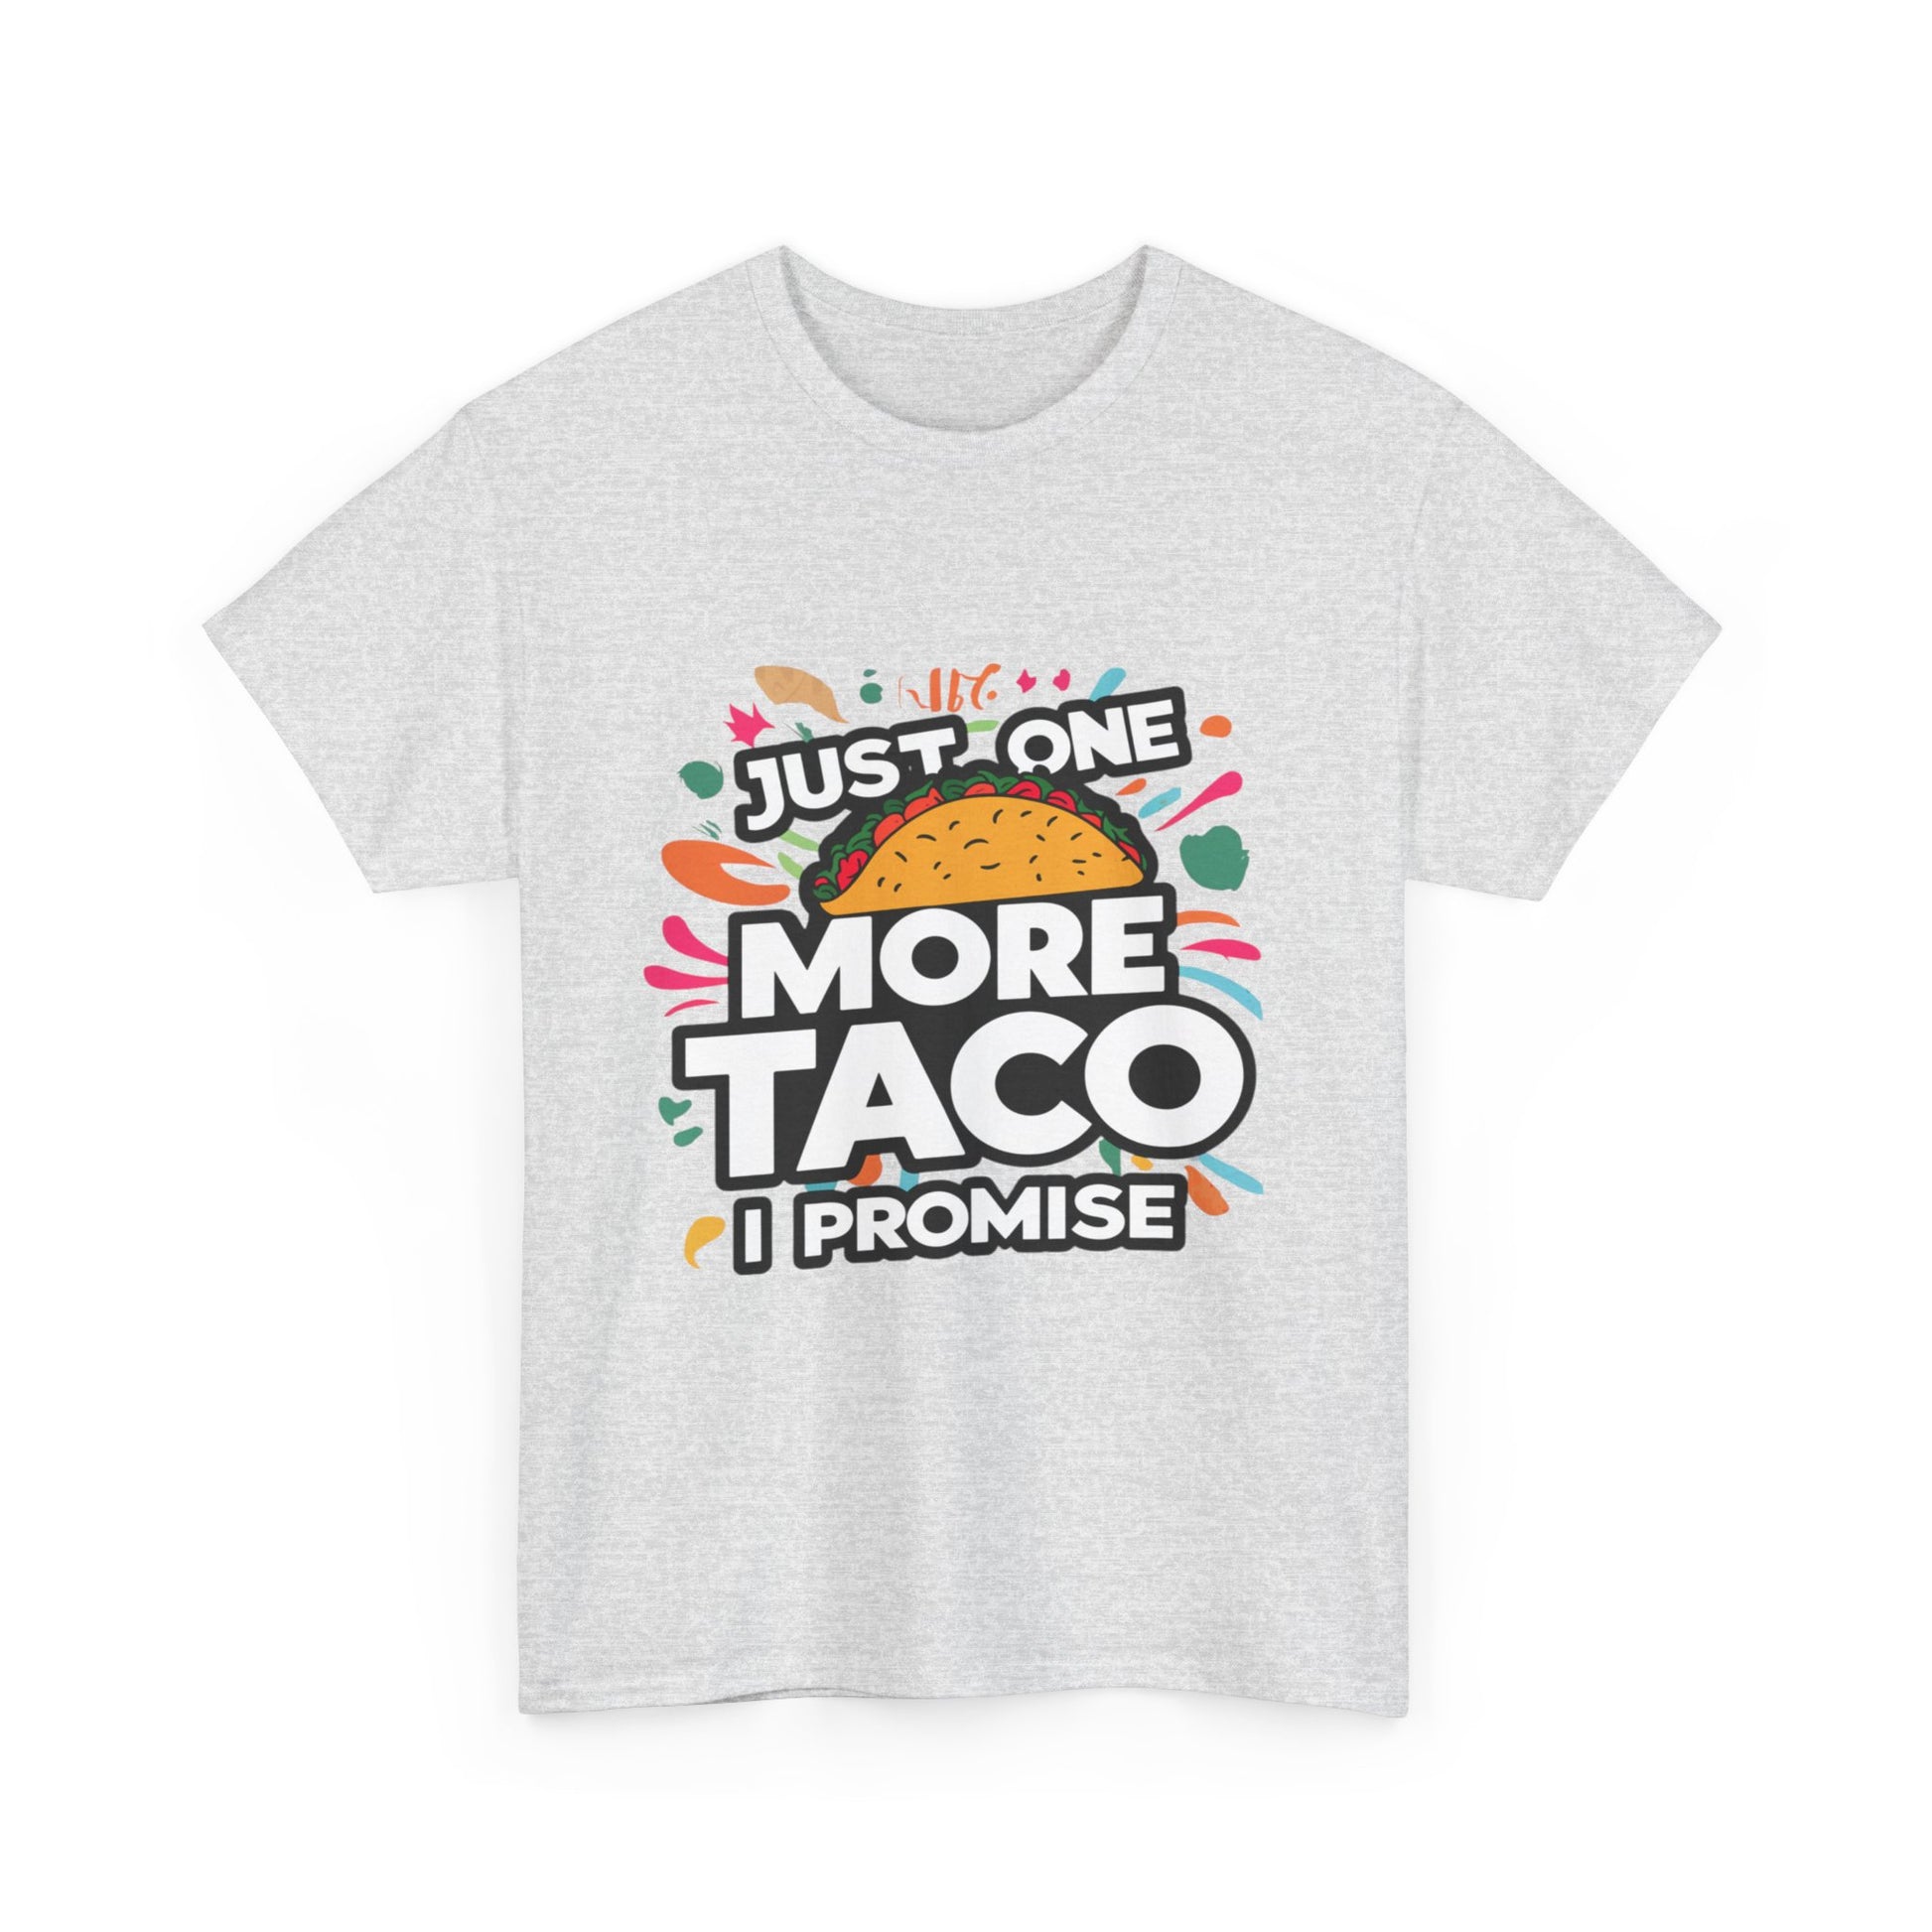 Just One More Taco I Promise Mexican Food Graphic Unisex Heavy Cotton Tee Cotton Funny Humorous Graphic Soft Premium Unisex Men Women Ash T-shirt Birthday Gift-51